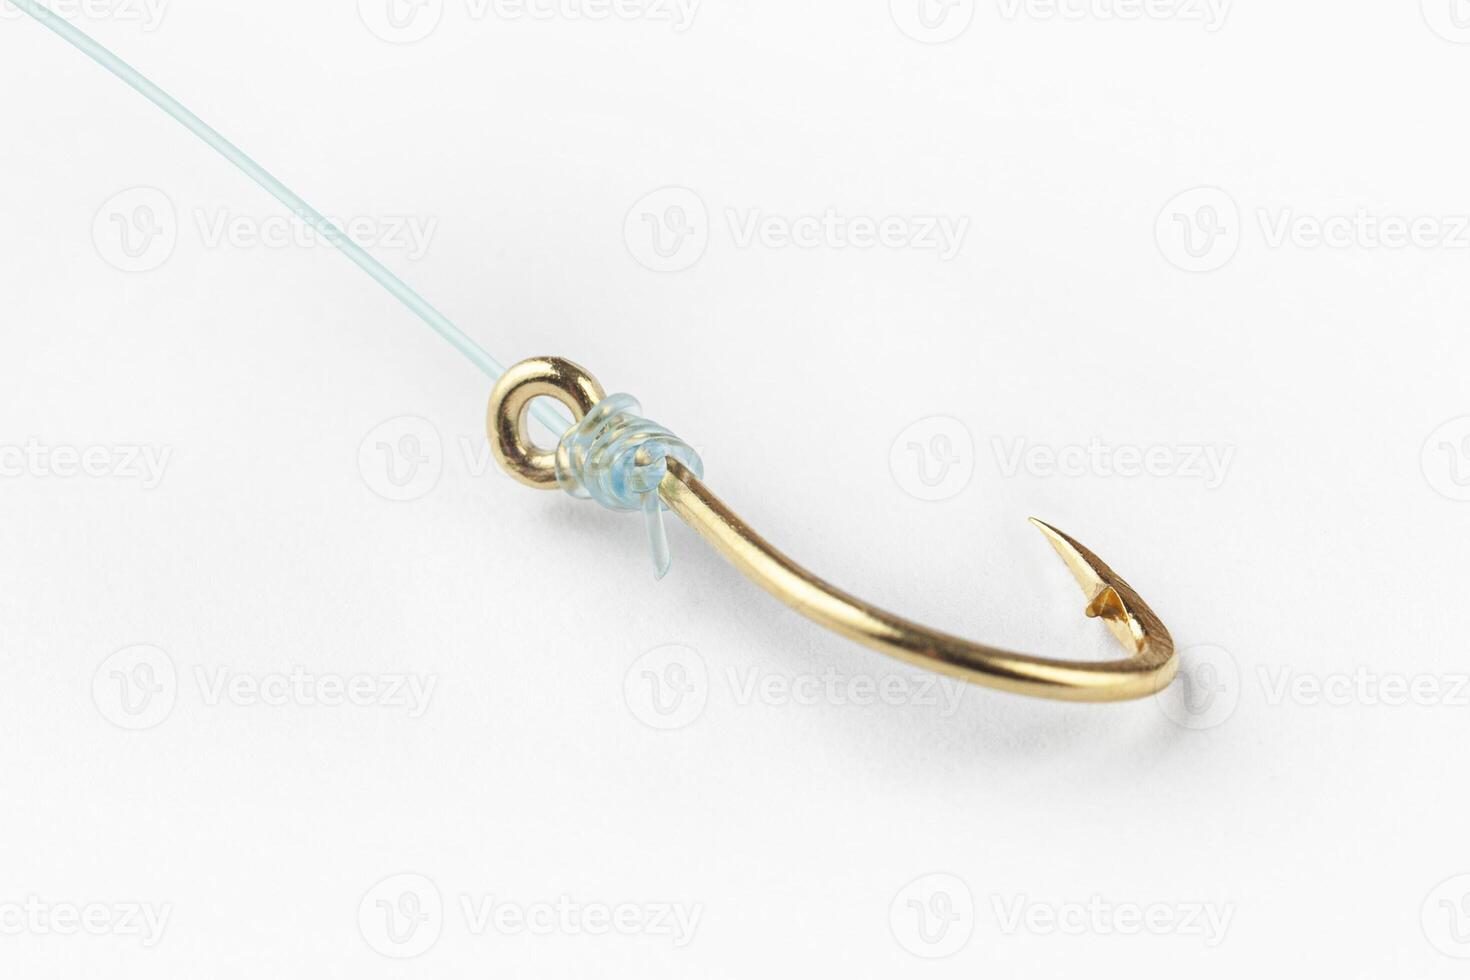 Fishing Hook Stock Photos, Images and Backgrounds for Free Download